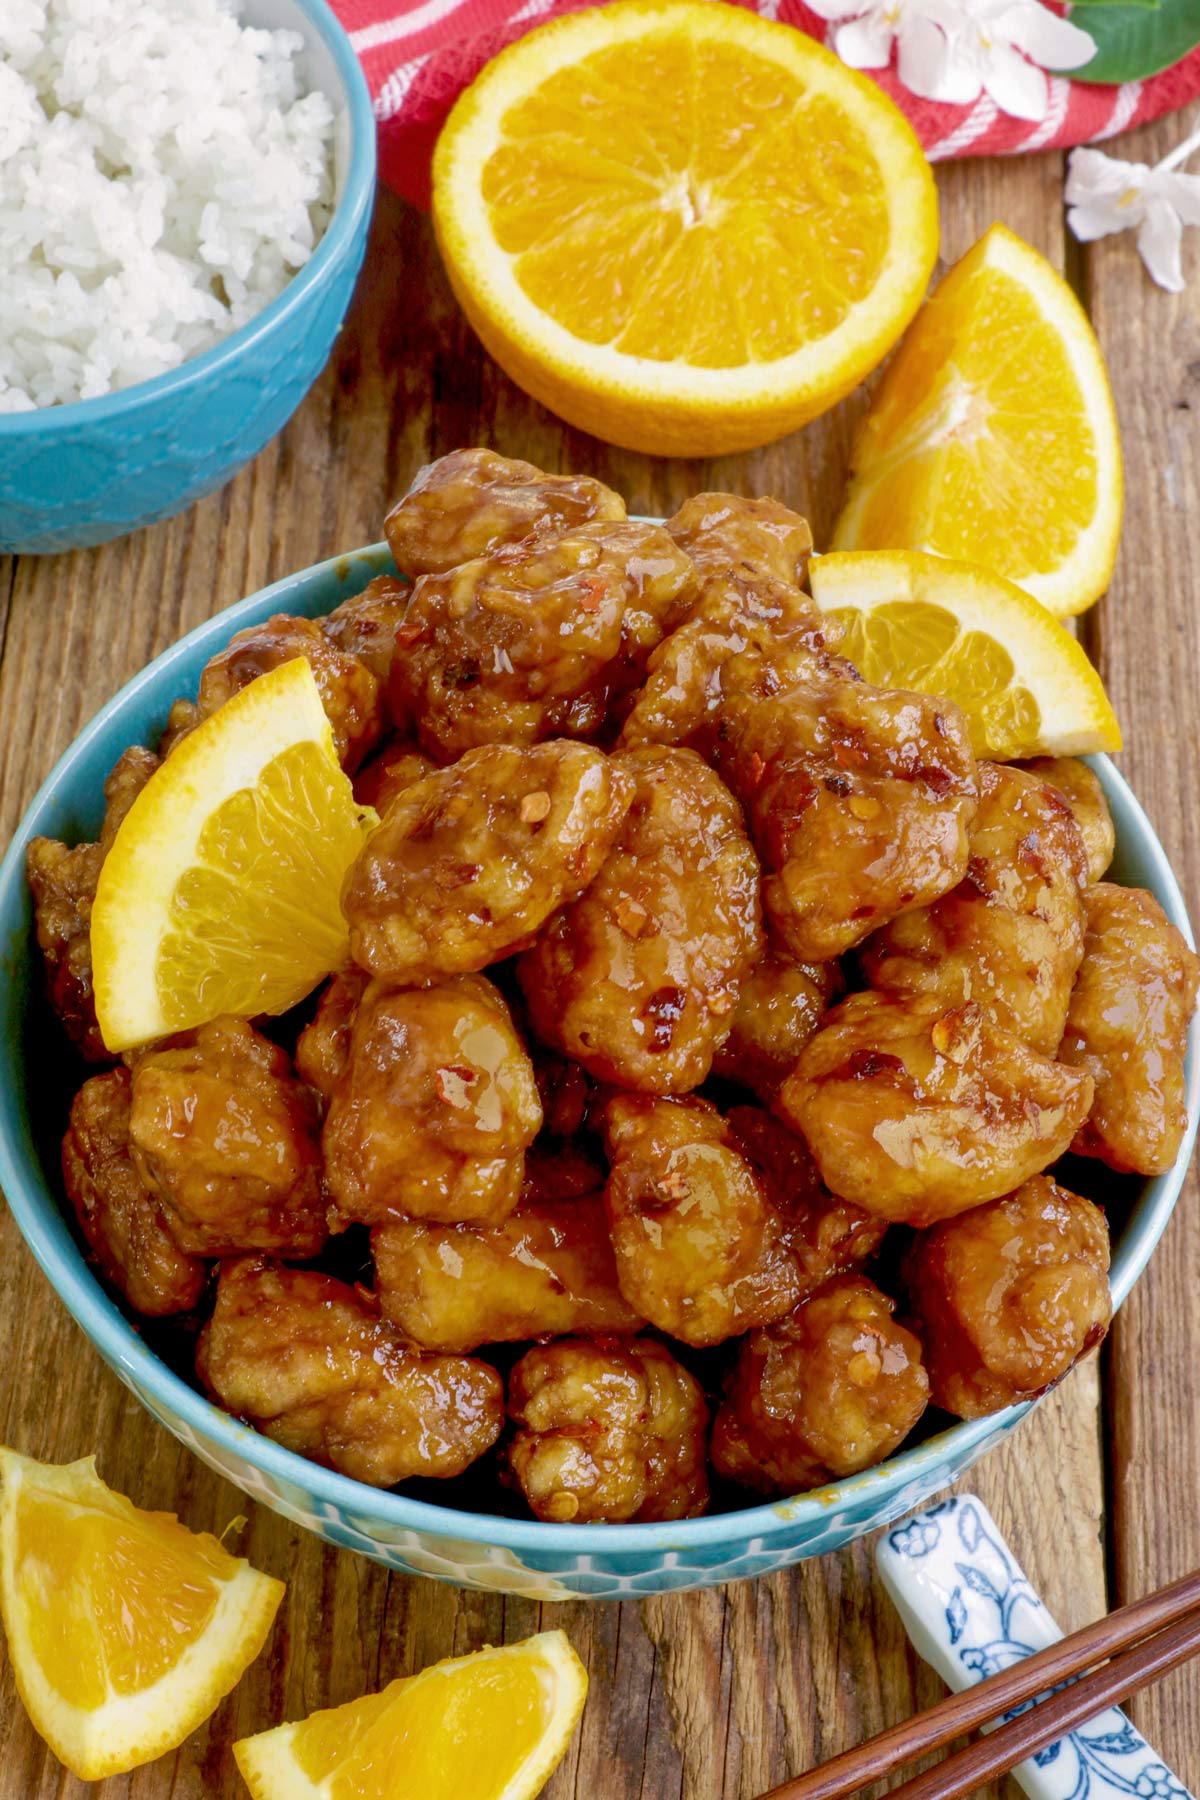 Panda Express Orange Chicken with crunchy chicken bites doused in a delicious citrus-flavored sauce.